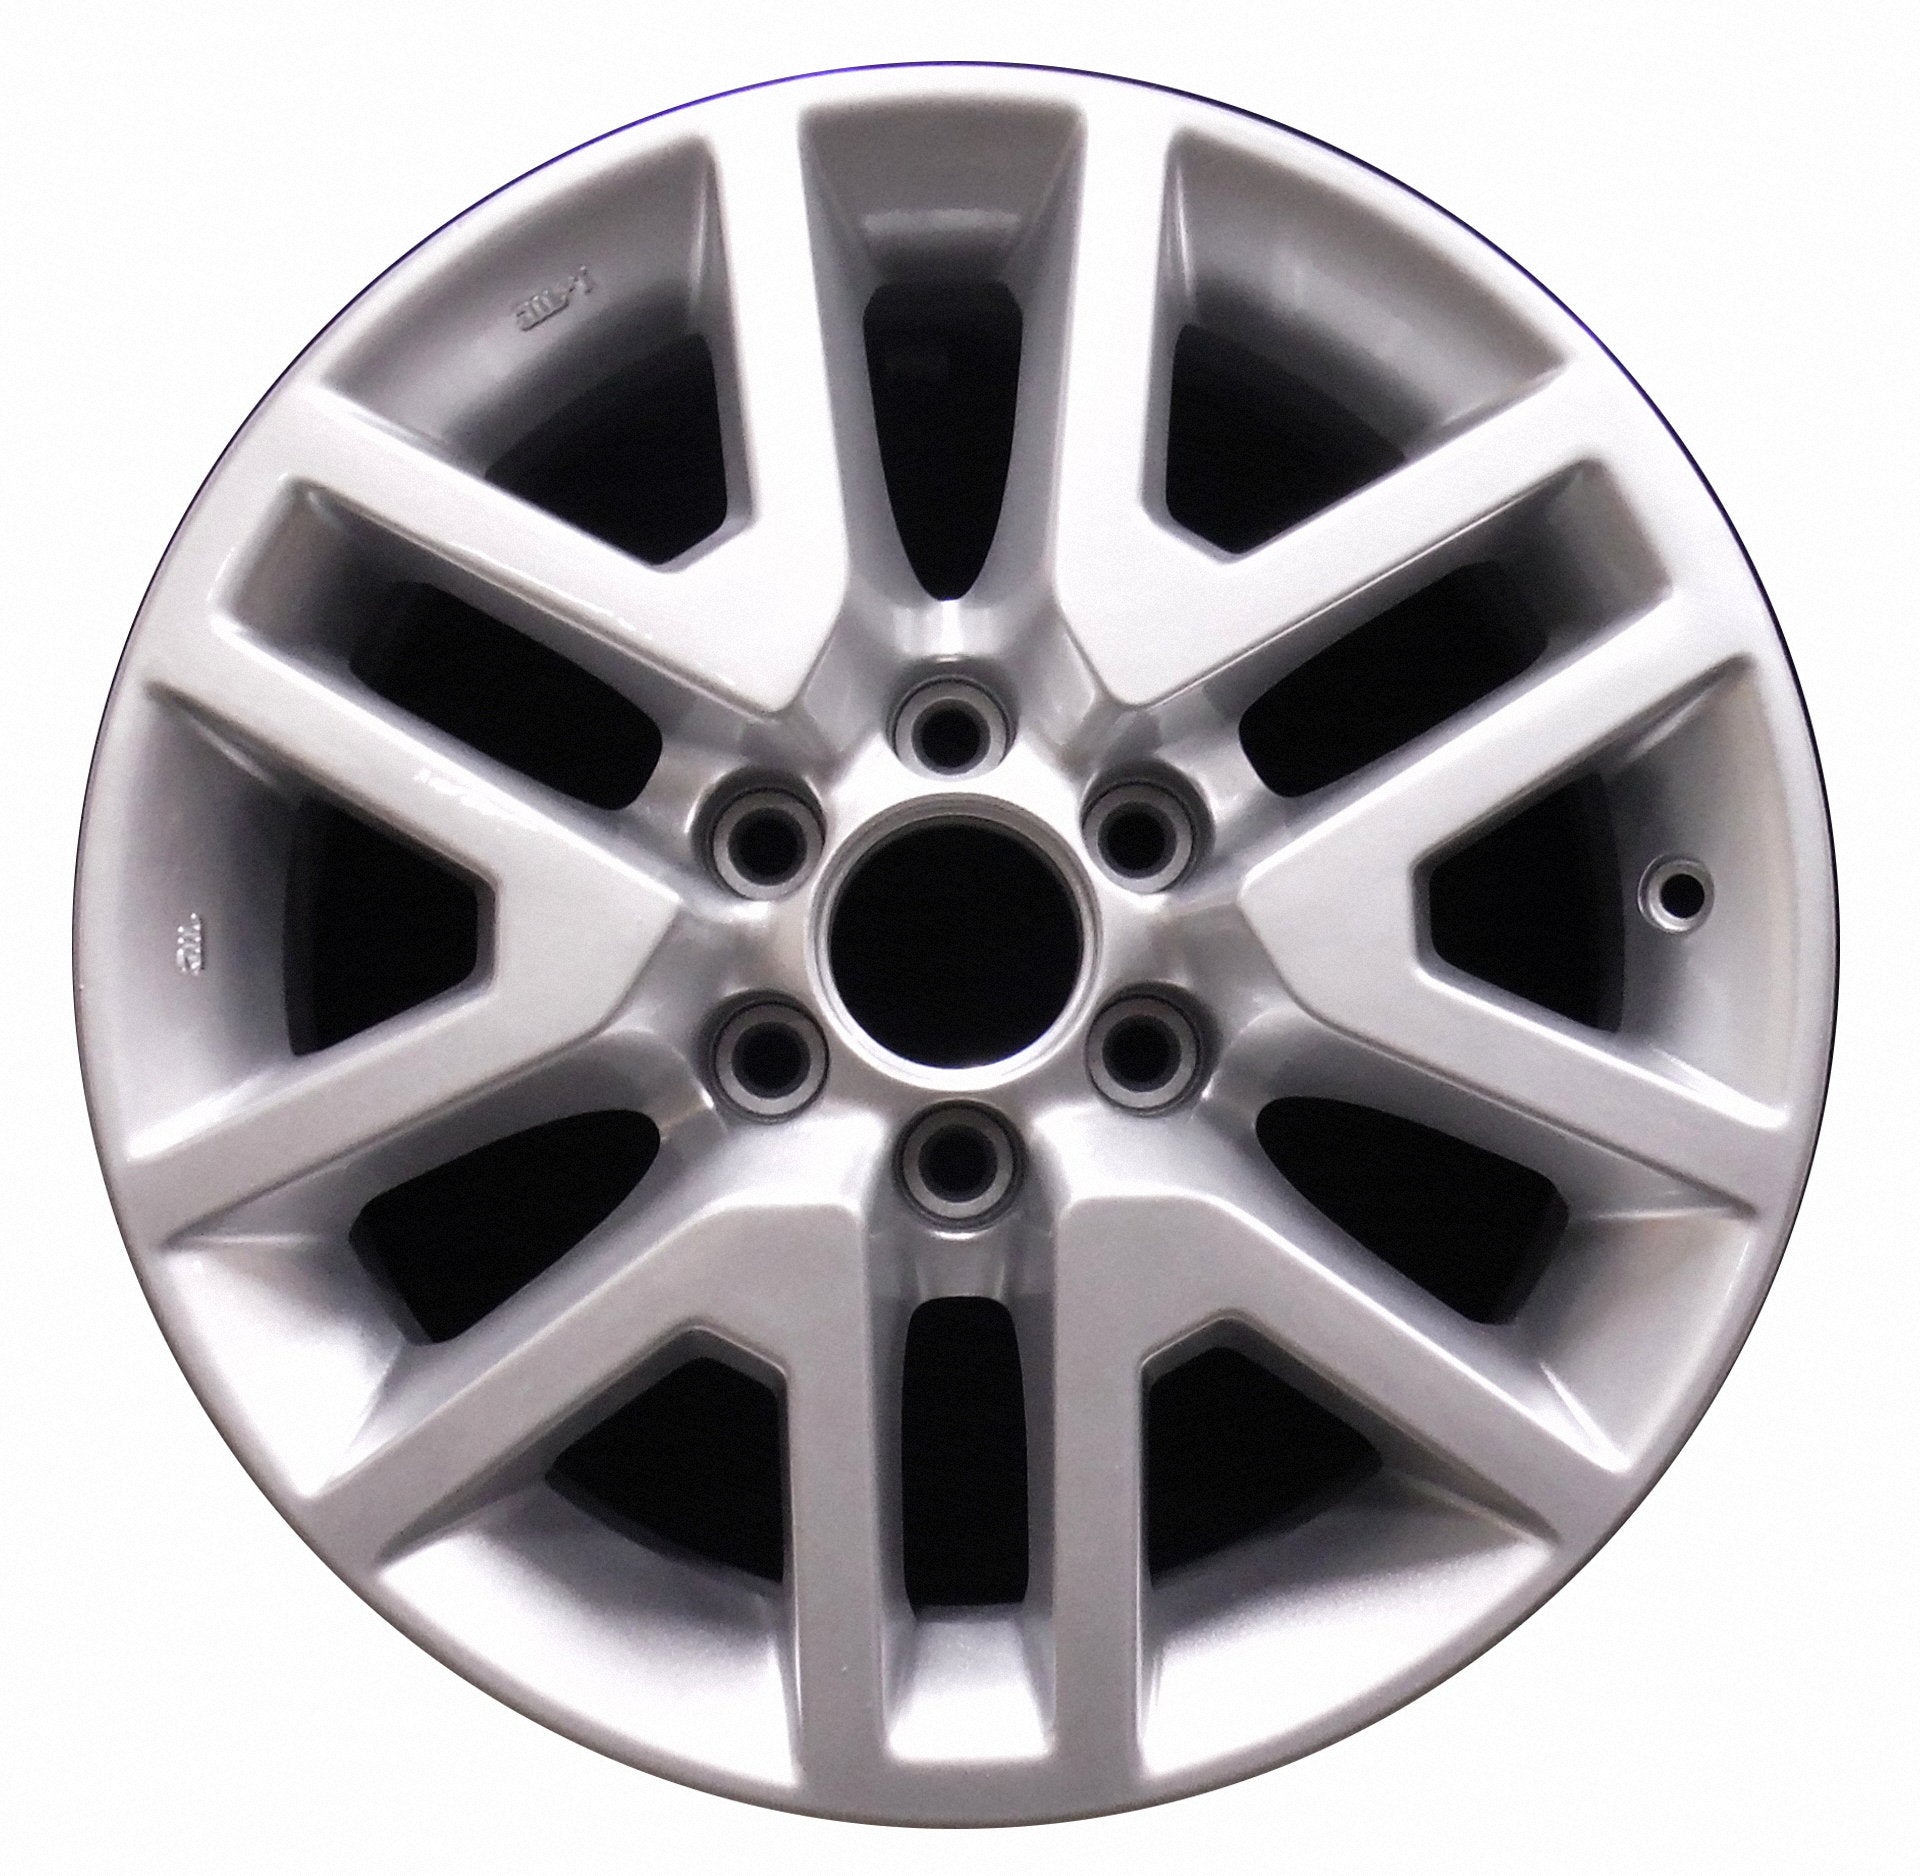 Nissan Frontier  2014, 2015, 2016, 2017 Factory OEM Car Wheel Size 16x7 Alloy WAO.62611.PS08.FF